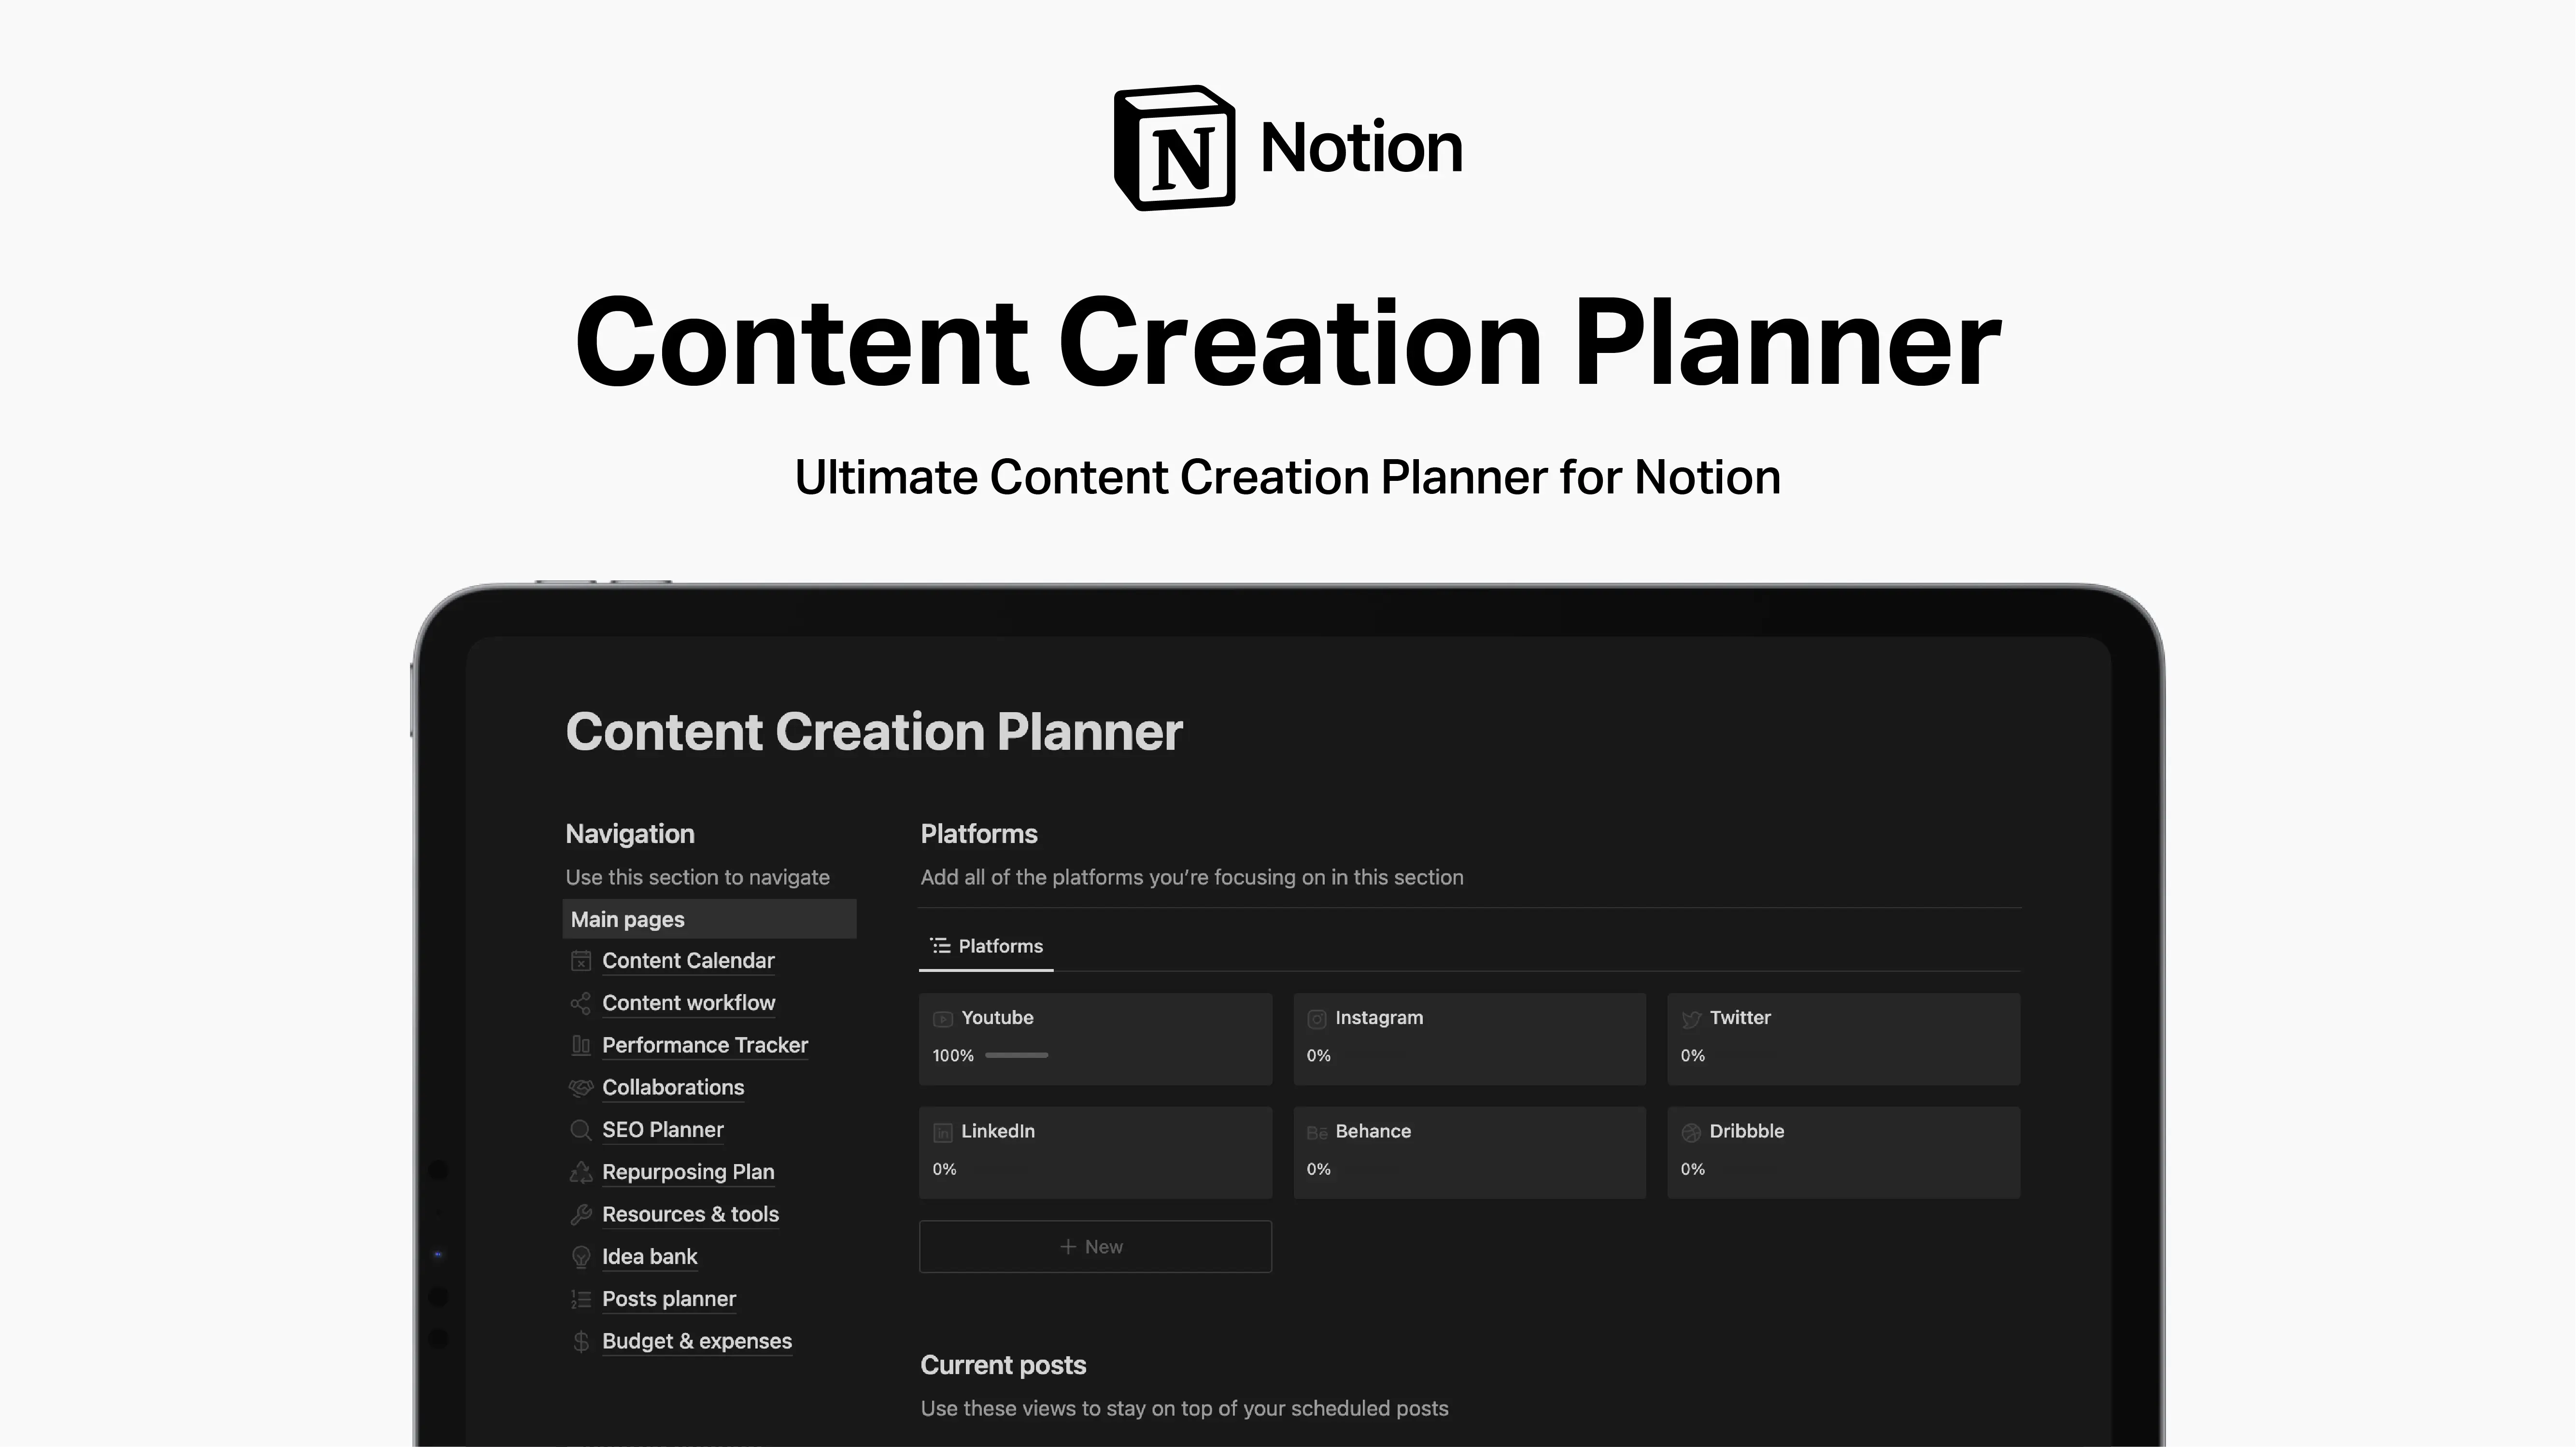 Content Creation Planner image